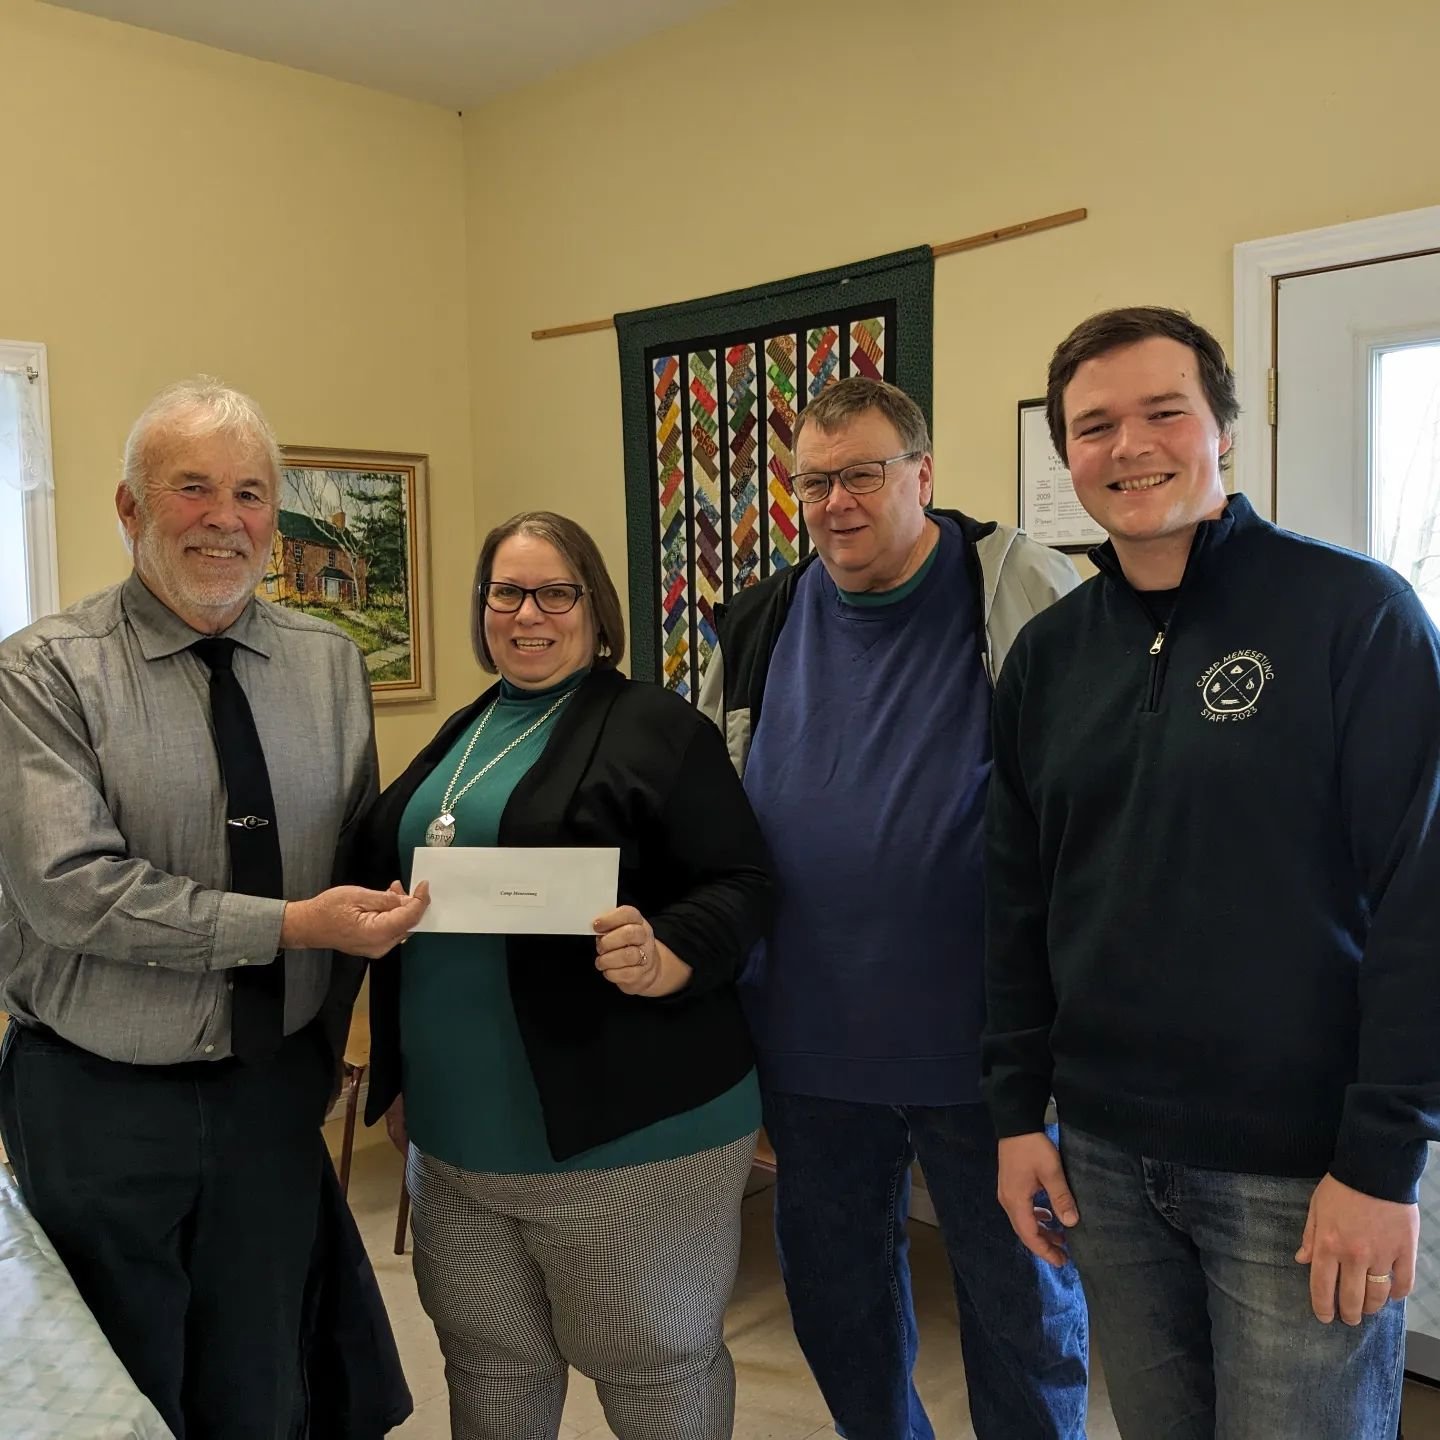 Big thank you to the Britannia Masonic Lodge No. 170 in Seaforth for their generous donation towards our camp wide Hydro upgrades!